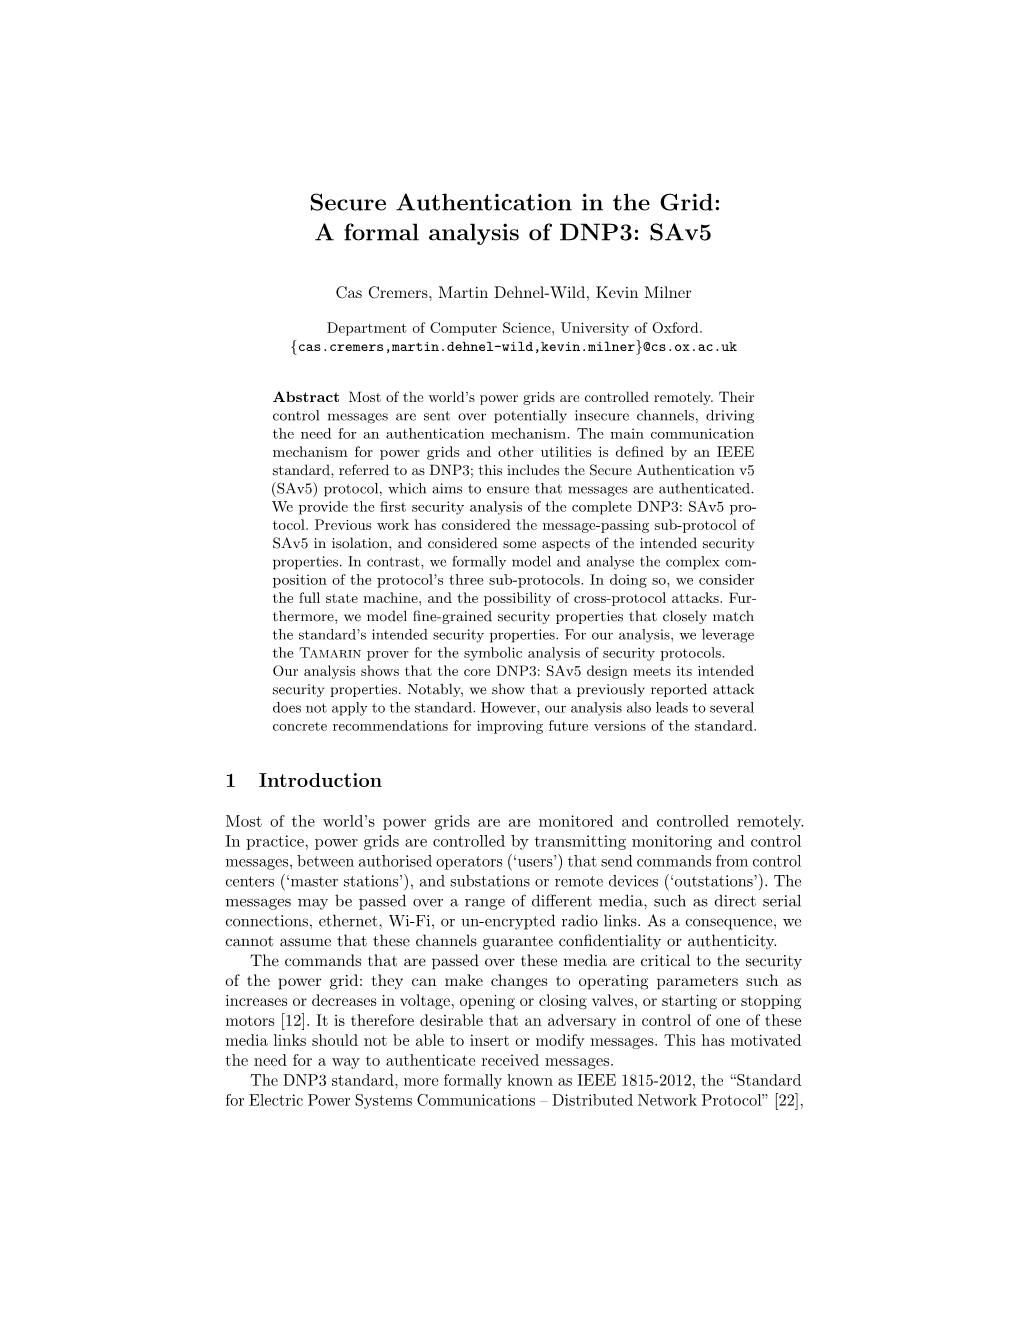 Secure Authentication in the Grid: a Formal Analysis of DNP3: Sav5